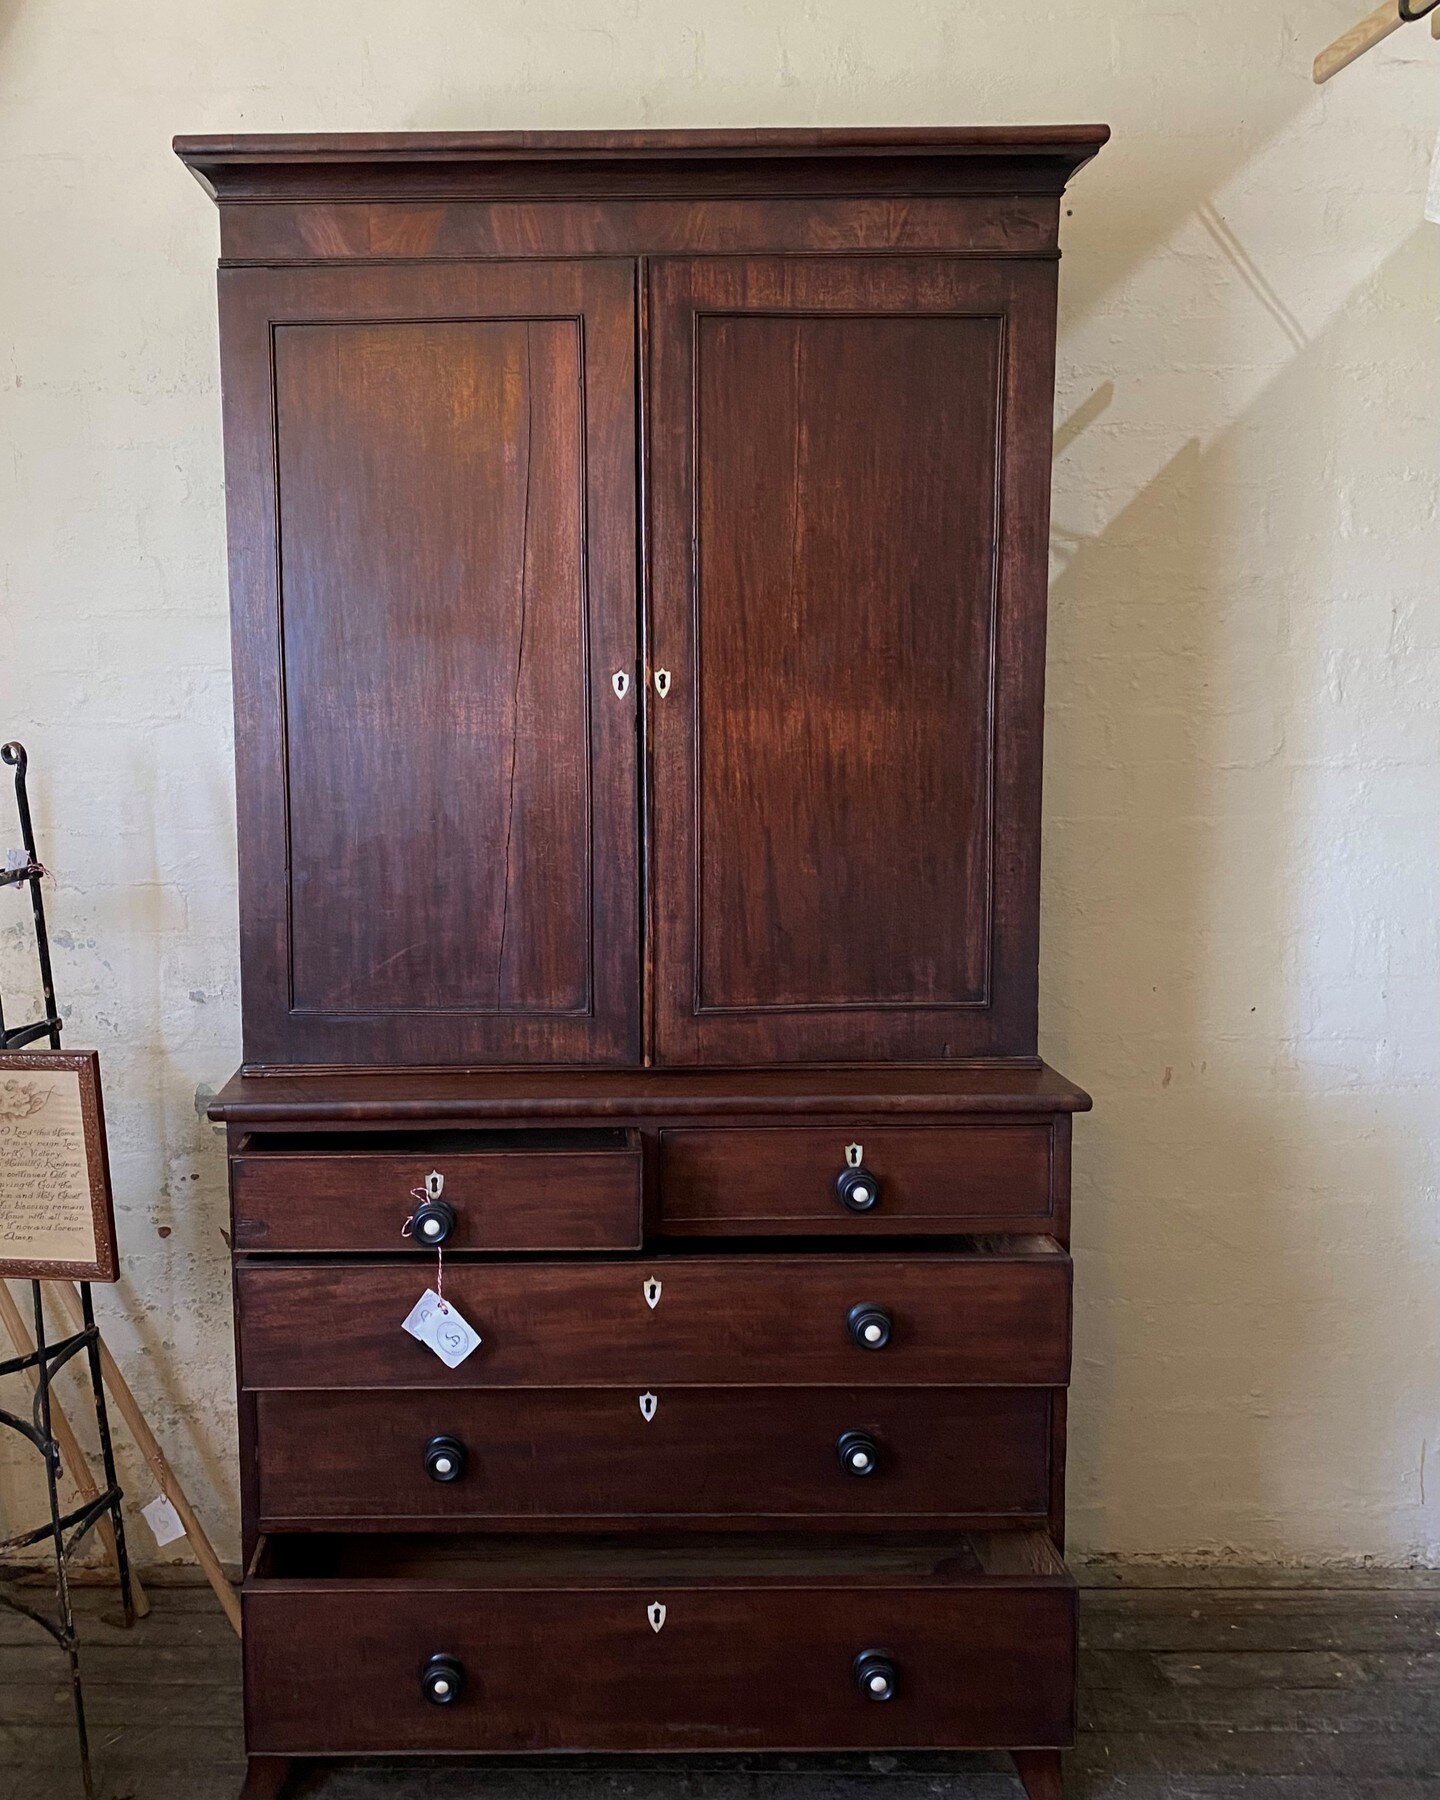 Just want to remind you that there is a Stillroom website (link in profile). This magnificent Georgian era linen press has just been added to the &quot;furniture&quot; section. And we're offering free shipping within 500km of the Brisbane cbd